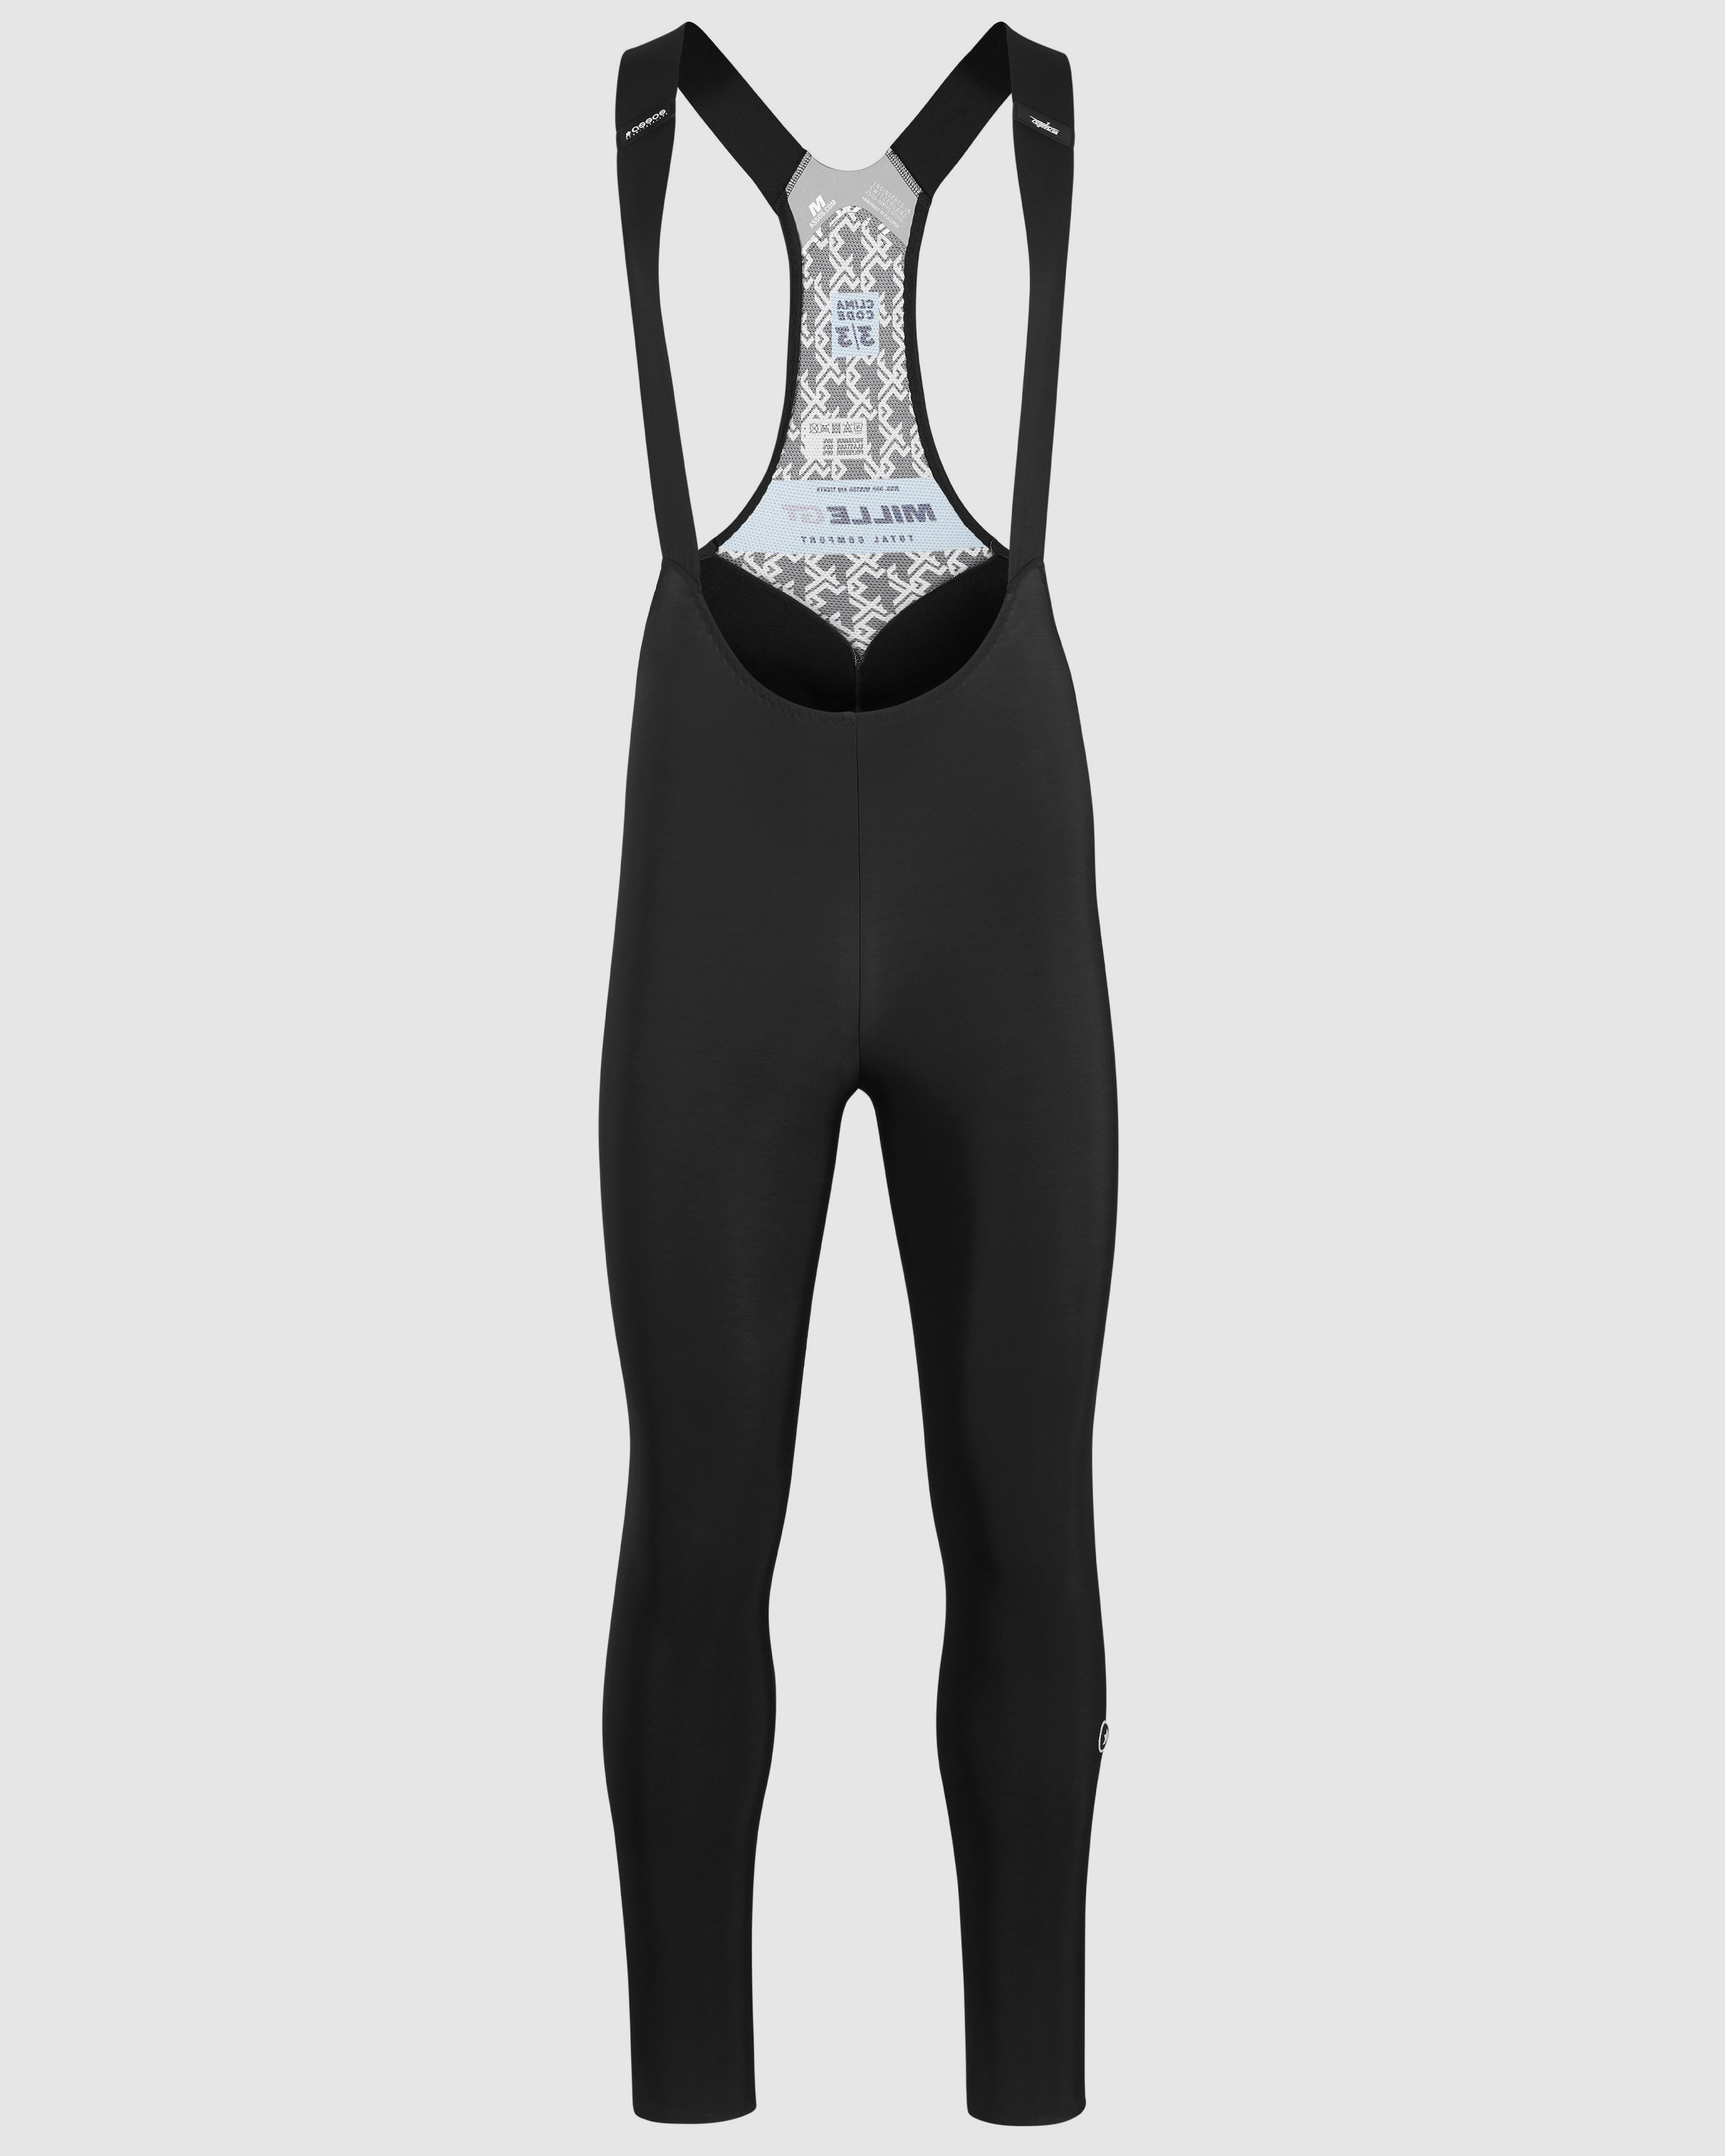 MILLE GT Winter Bib Tights no insert - ASSOS Of Switzerland - Official Outlet